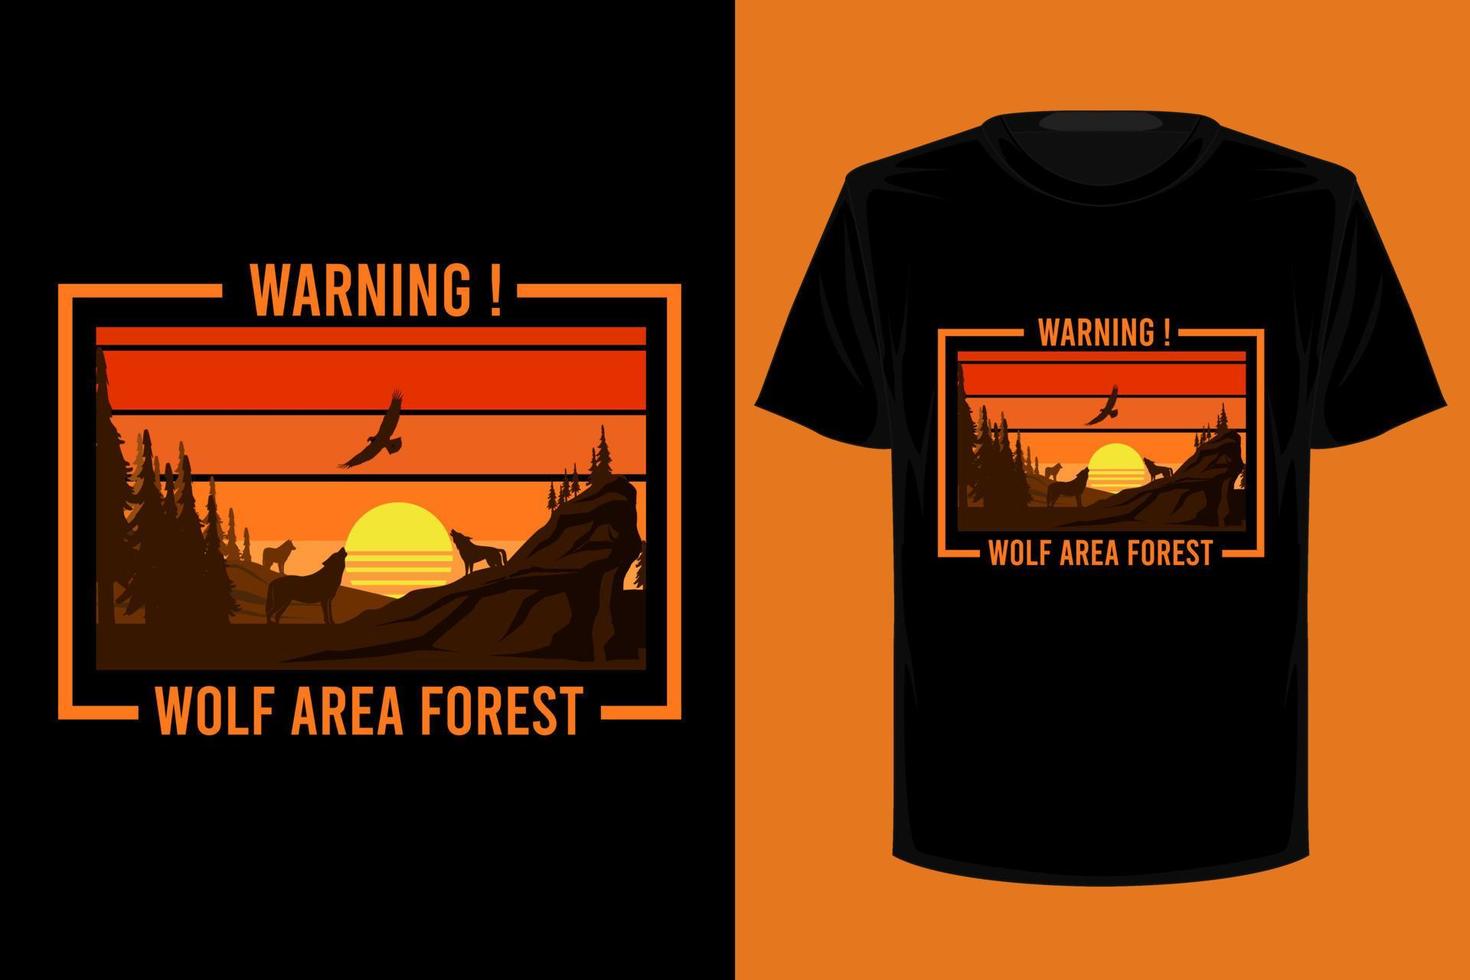 Warning wolf area forest retro vintage t shirt design vector